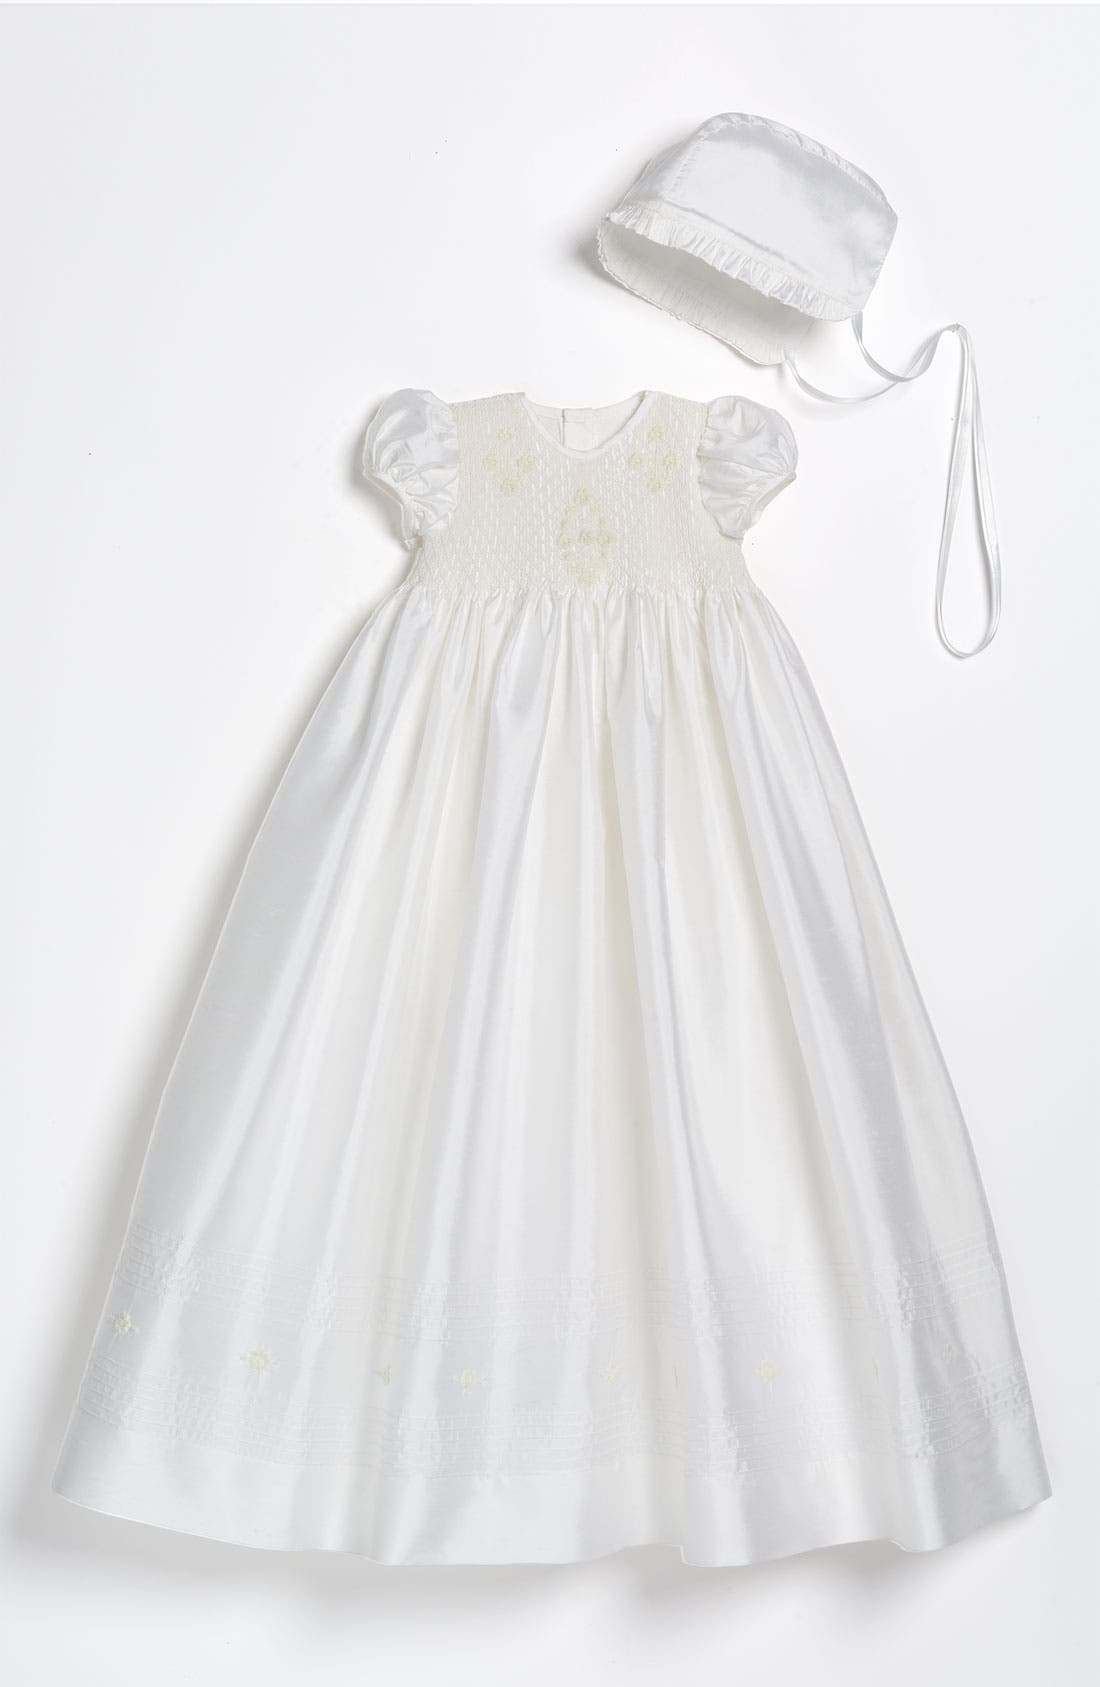 christian gown for baby girl